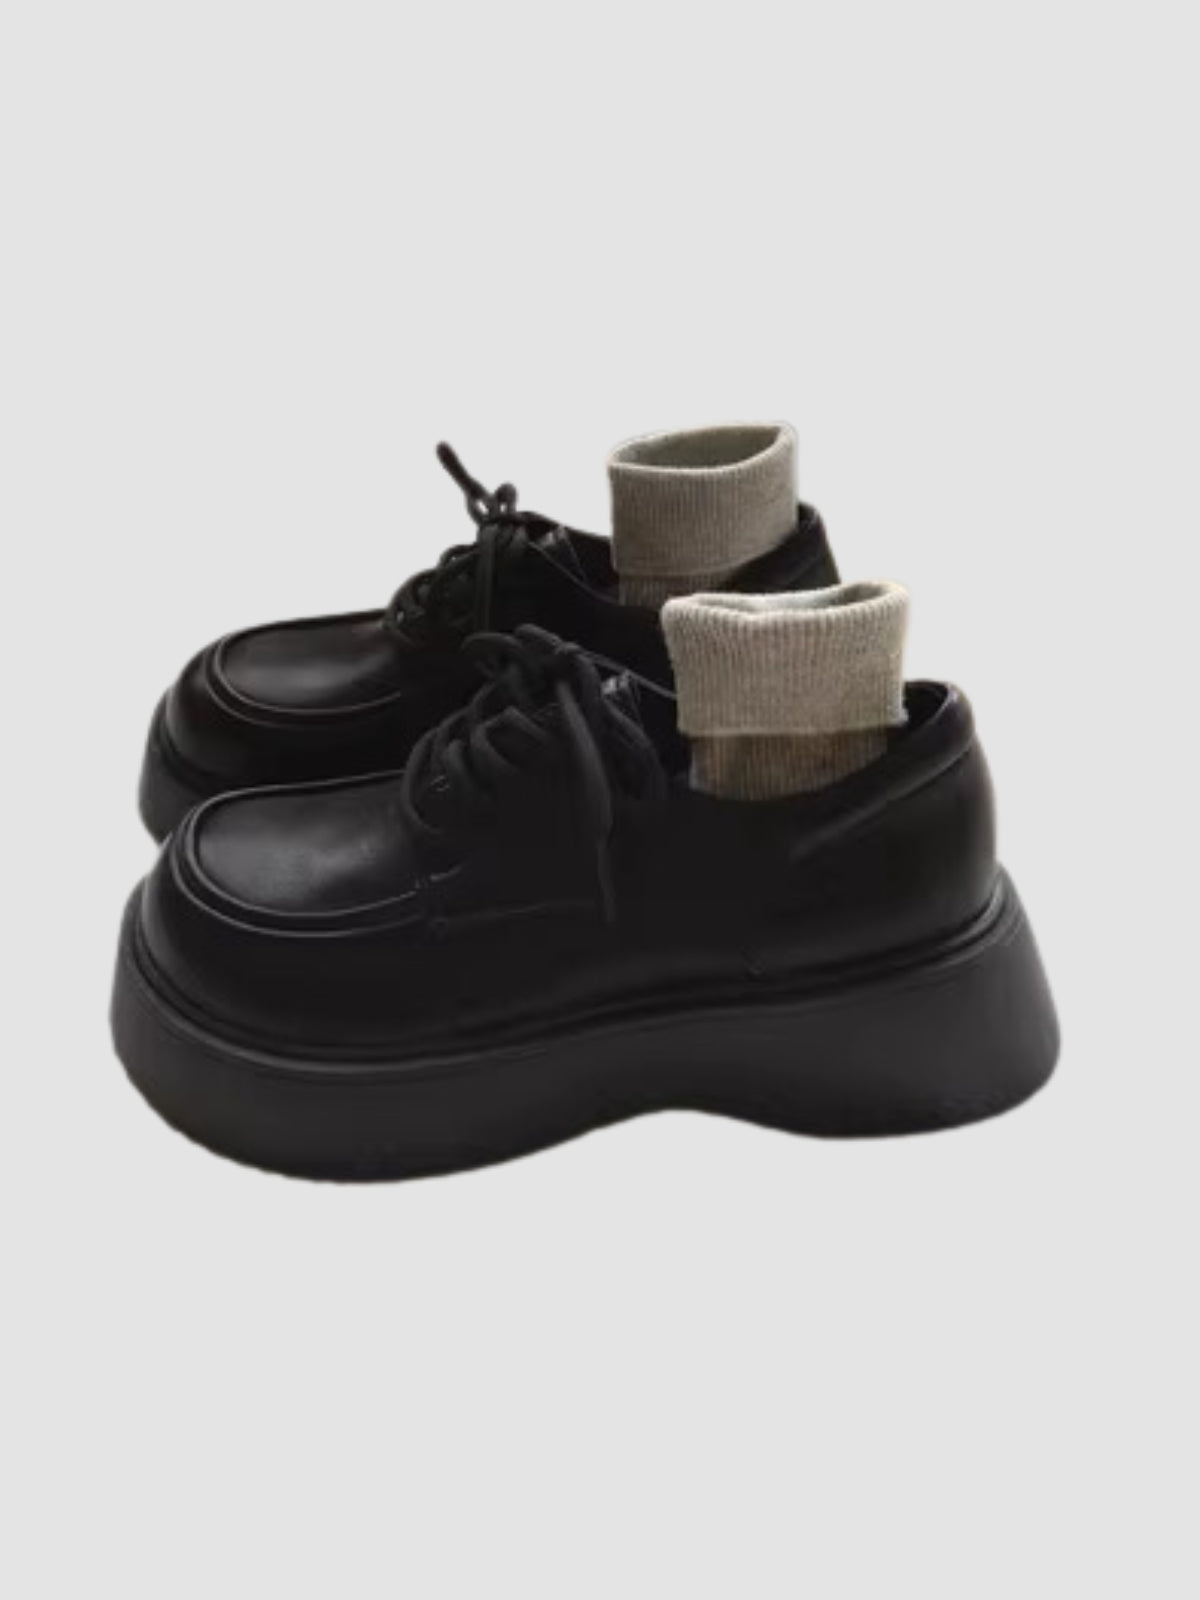 WLS Thick Soled Retro Chic Leather Shoes